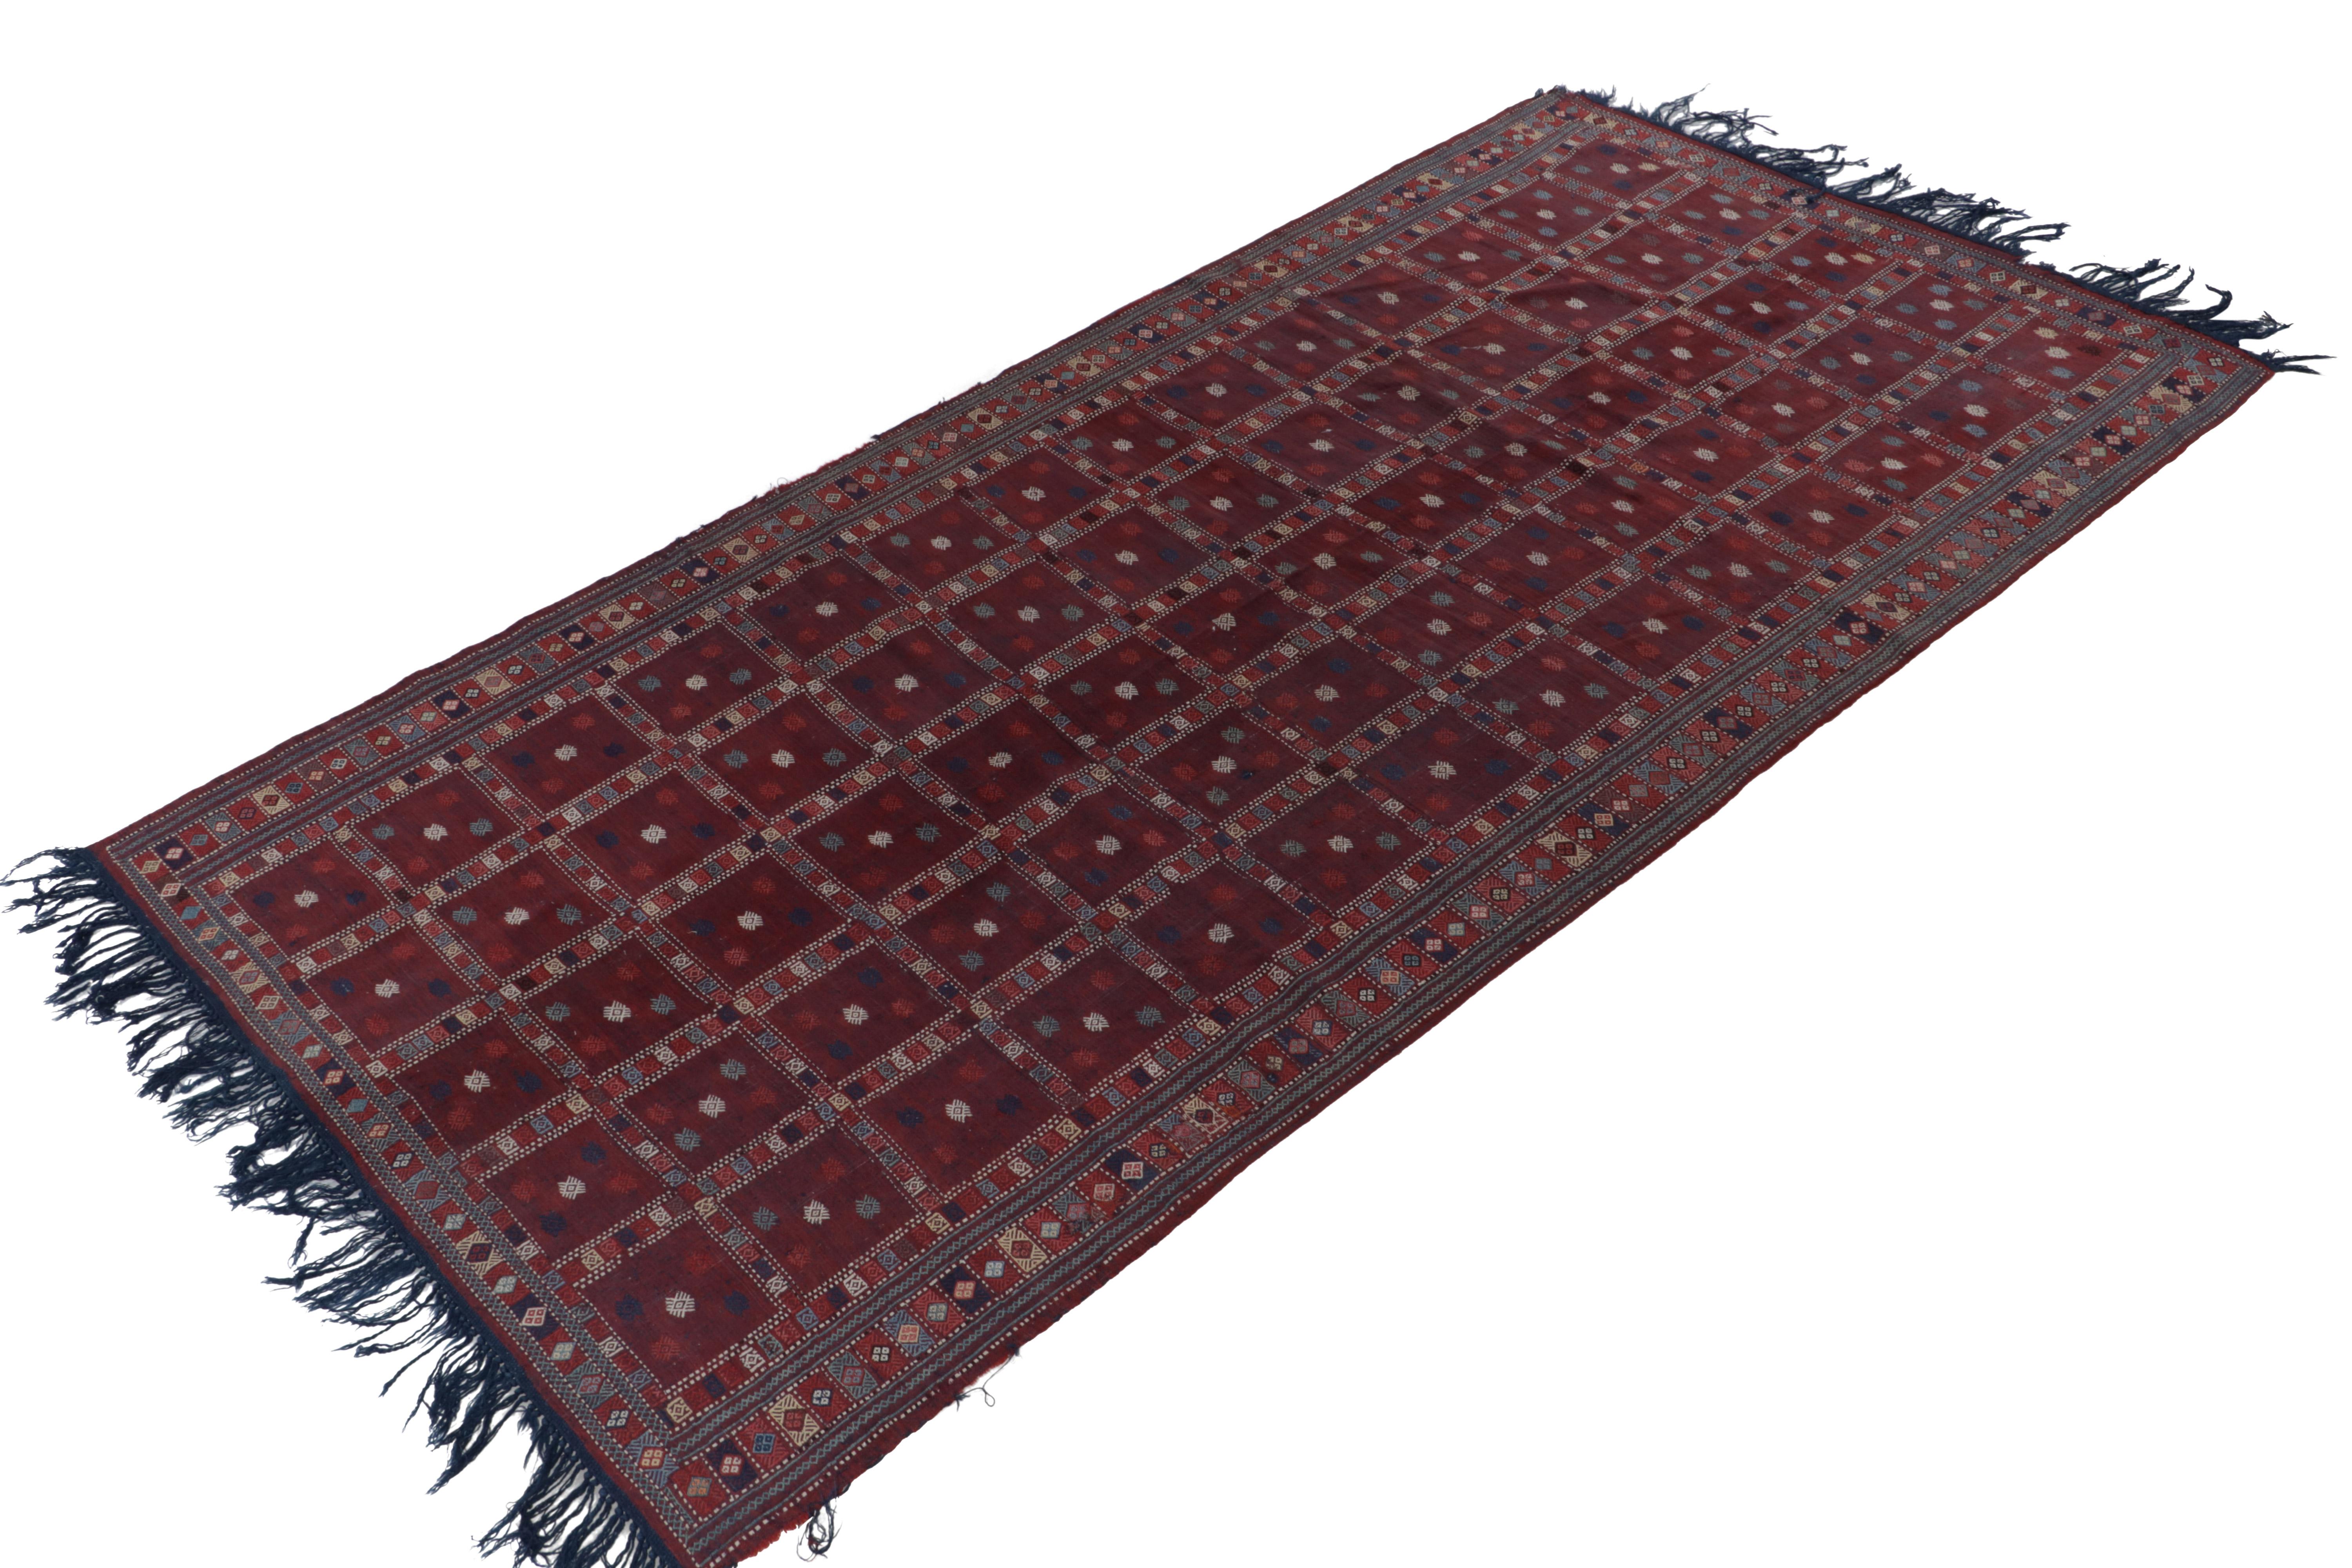 Tribal Antique Russian Kilim in Red, Blue & White Geometric Patterns by Rug & Kilim For Sale